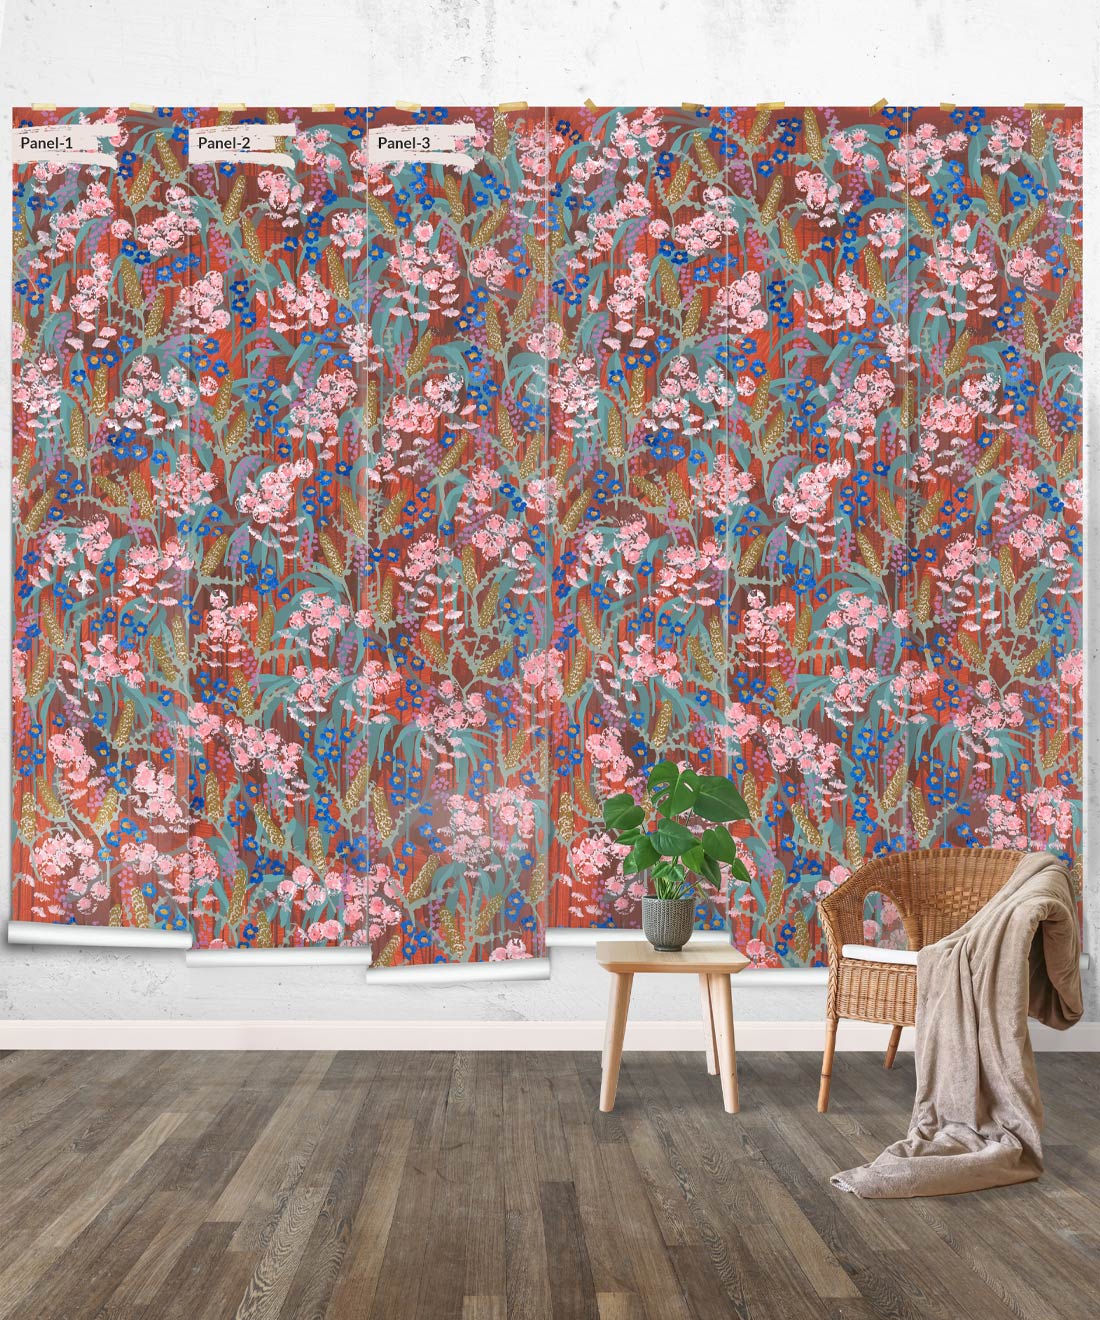 Feels Like Home Wallpaper • Tiff Manuell • Colorful Floral Wallpaper • Panels